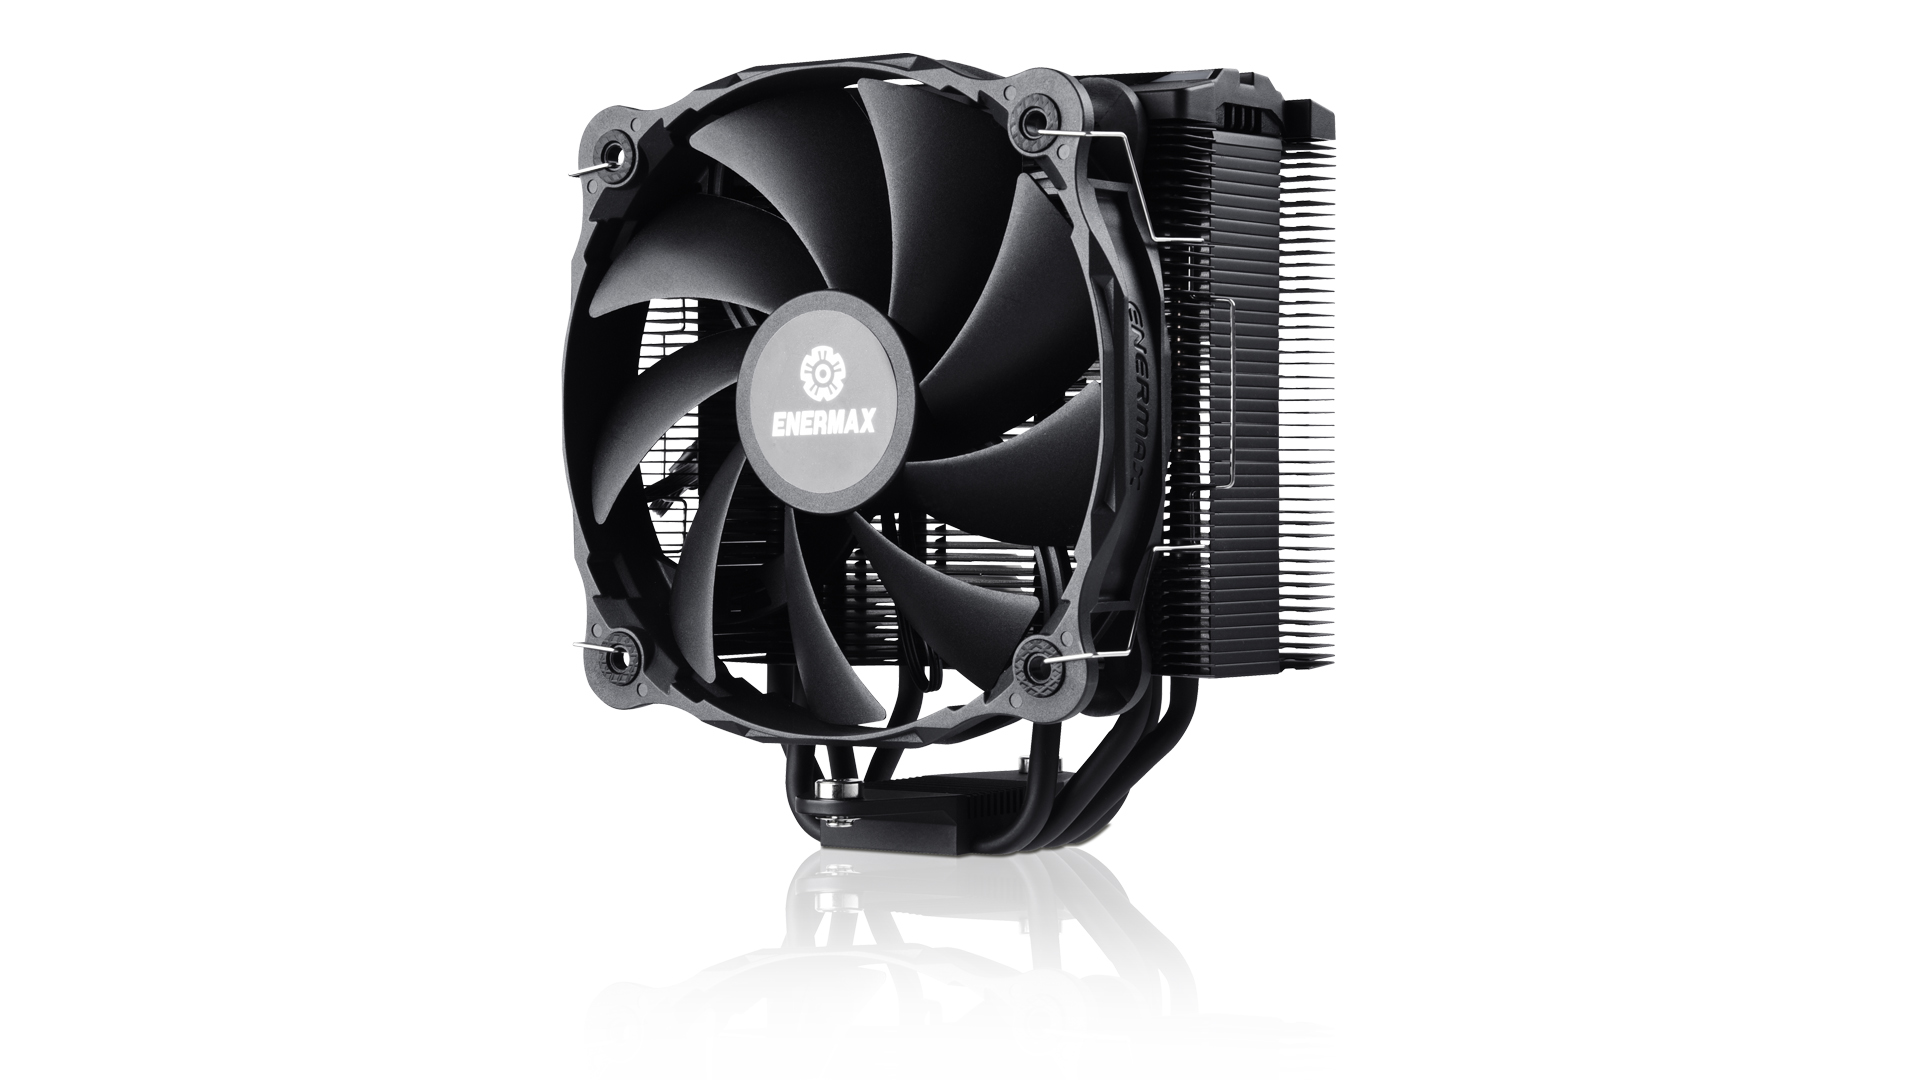 Enermax Europe Pc Components For Enthusiasts